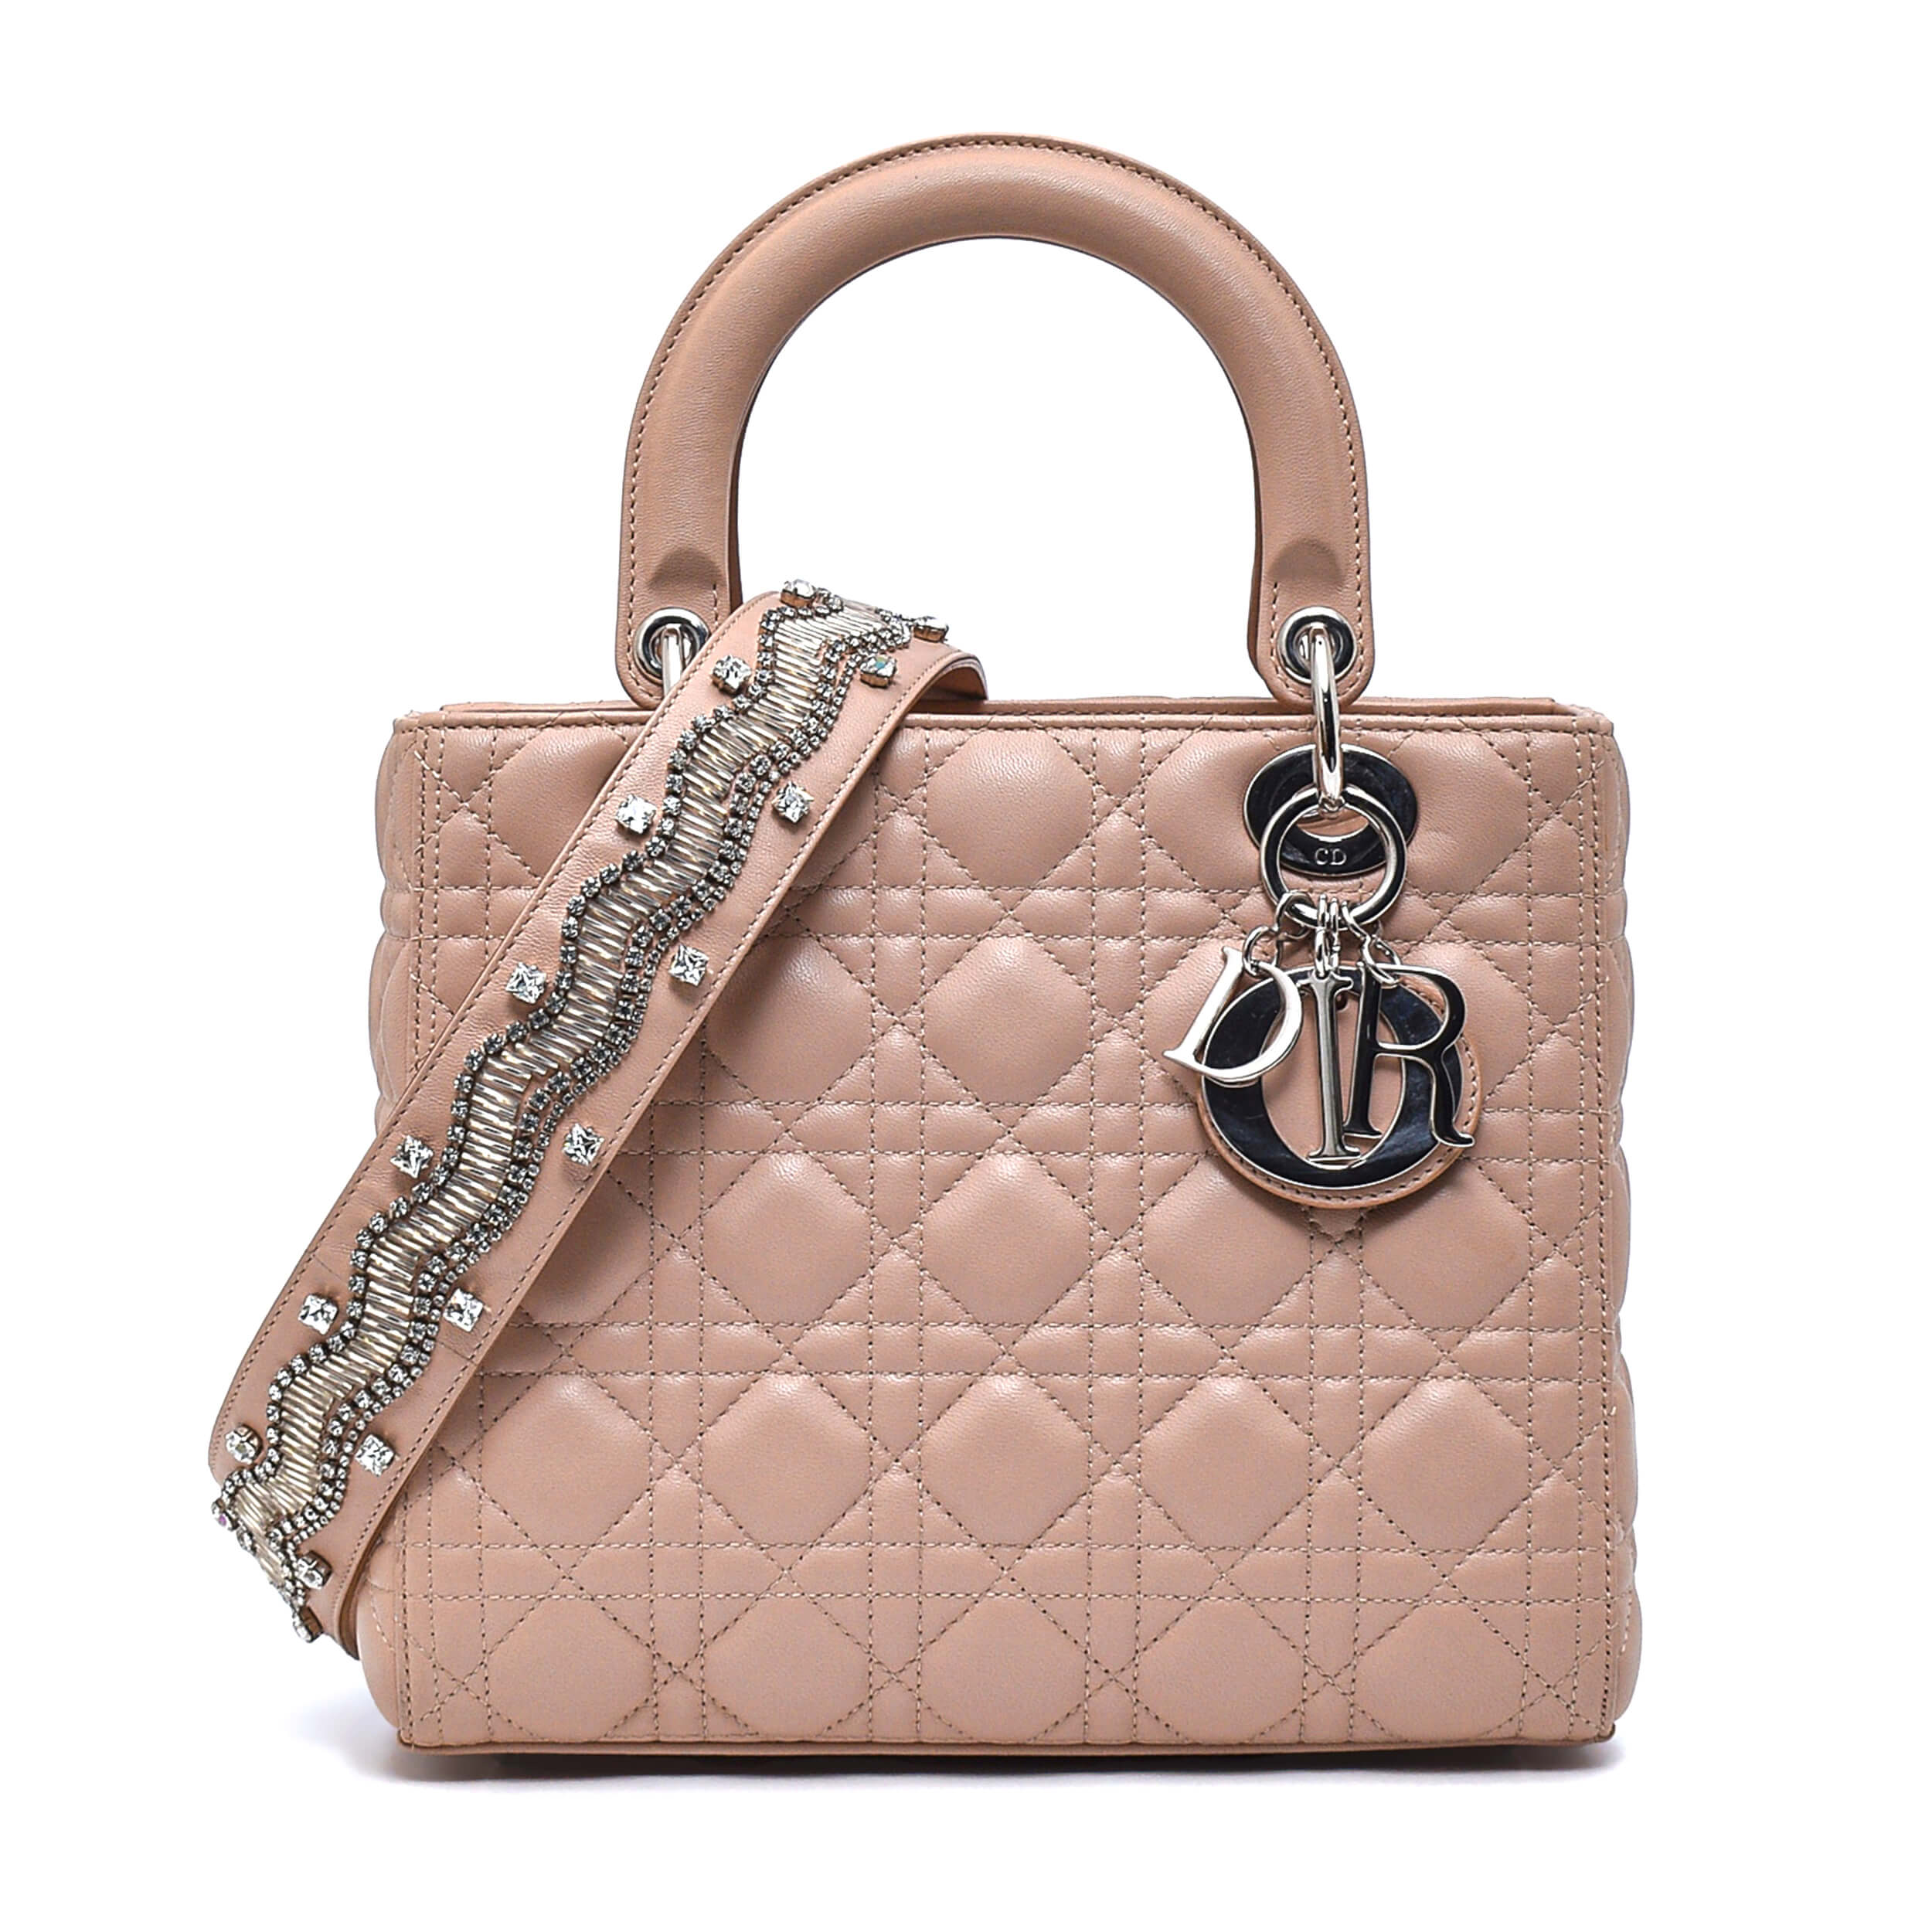 Christian Dior - Beige Cannage Leather Small Lady Dior Bag / Stone Detail Strap 